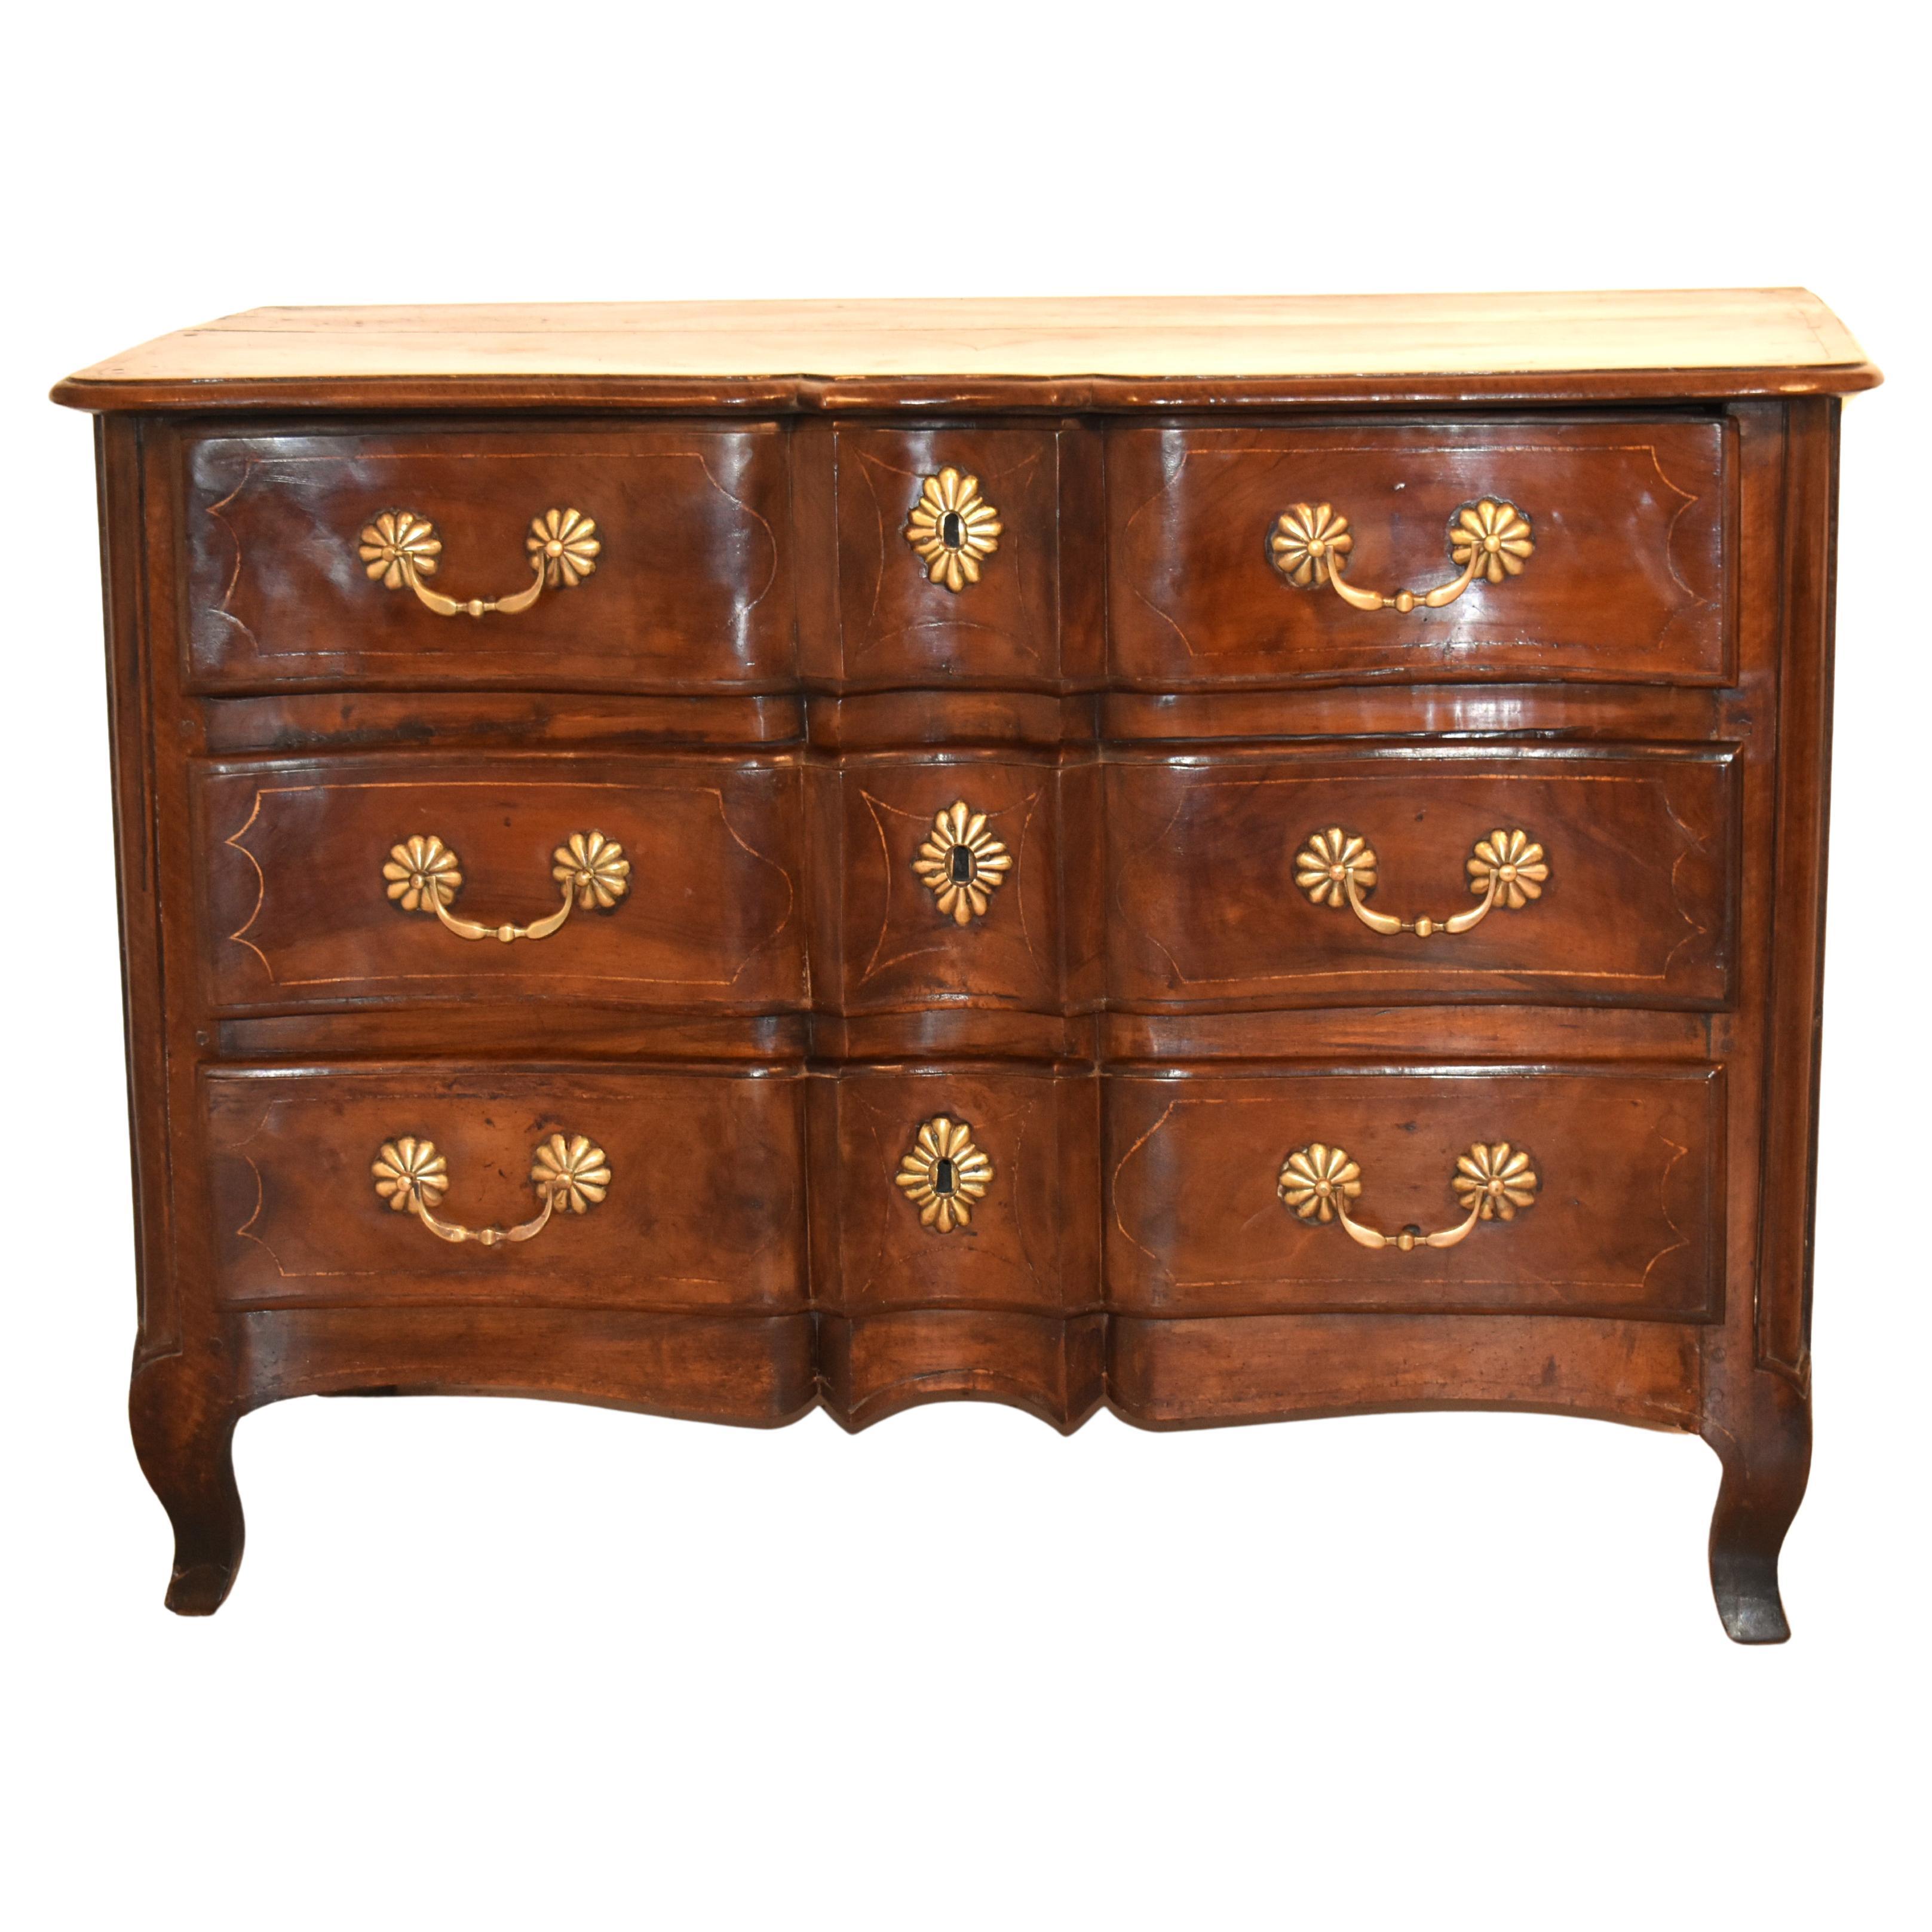 1750s Commodes and Chests of Drawers